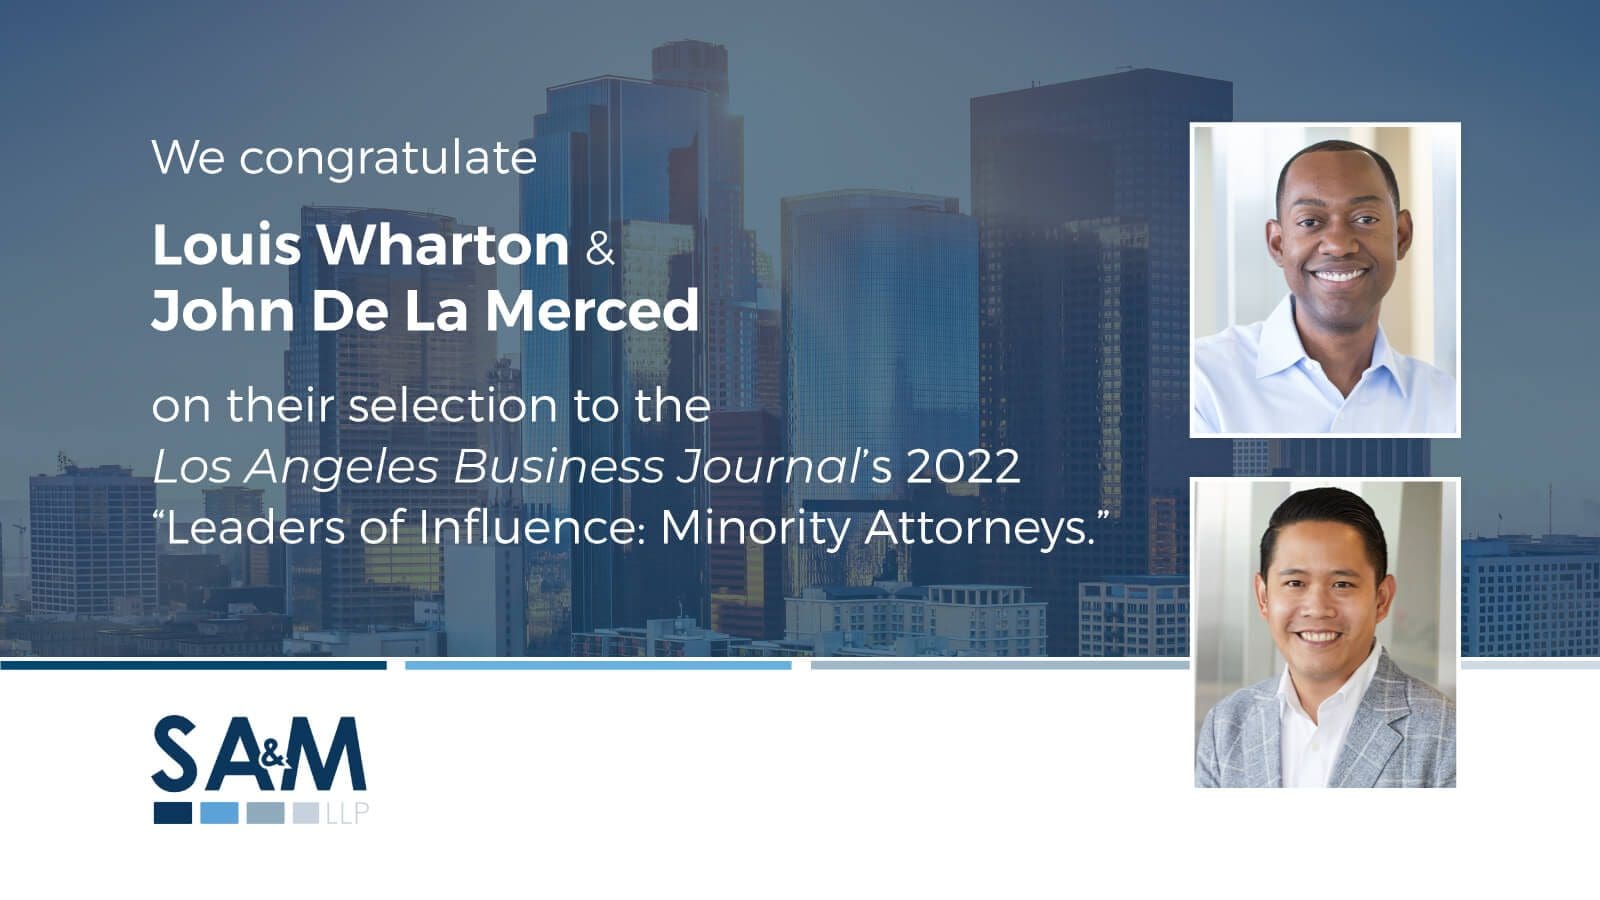 Louis Wharton and John De La Merced Selected to Los Angeles Business Journal’s 2022 “Leaders of Influence: Minority Attorneys”